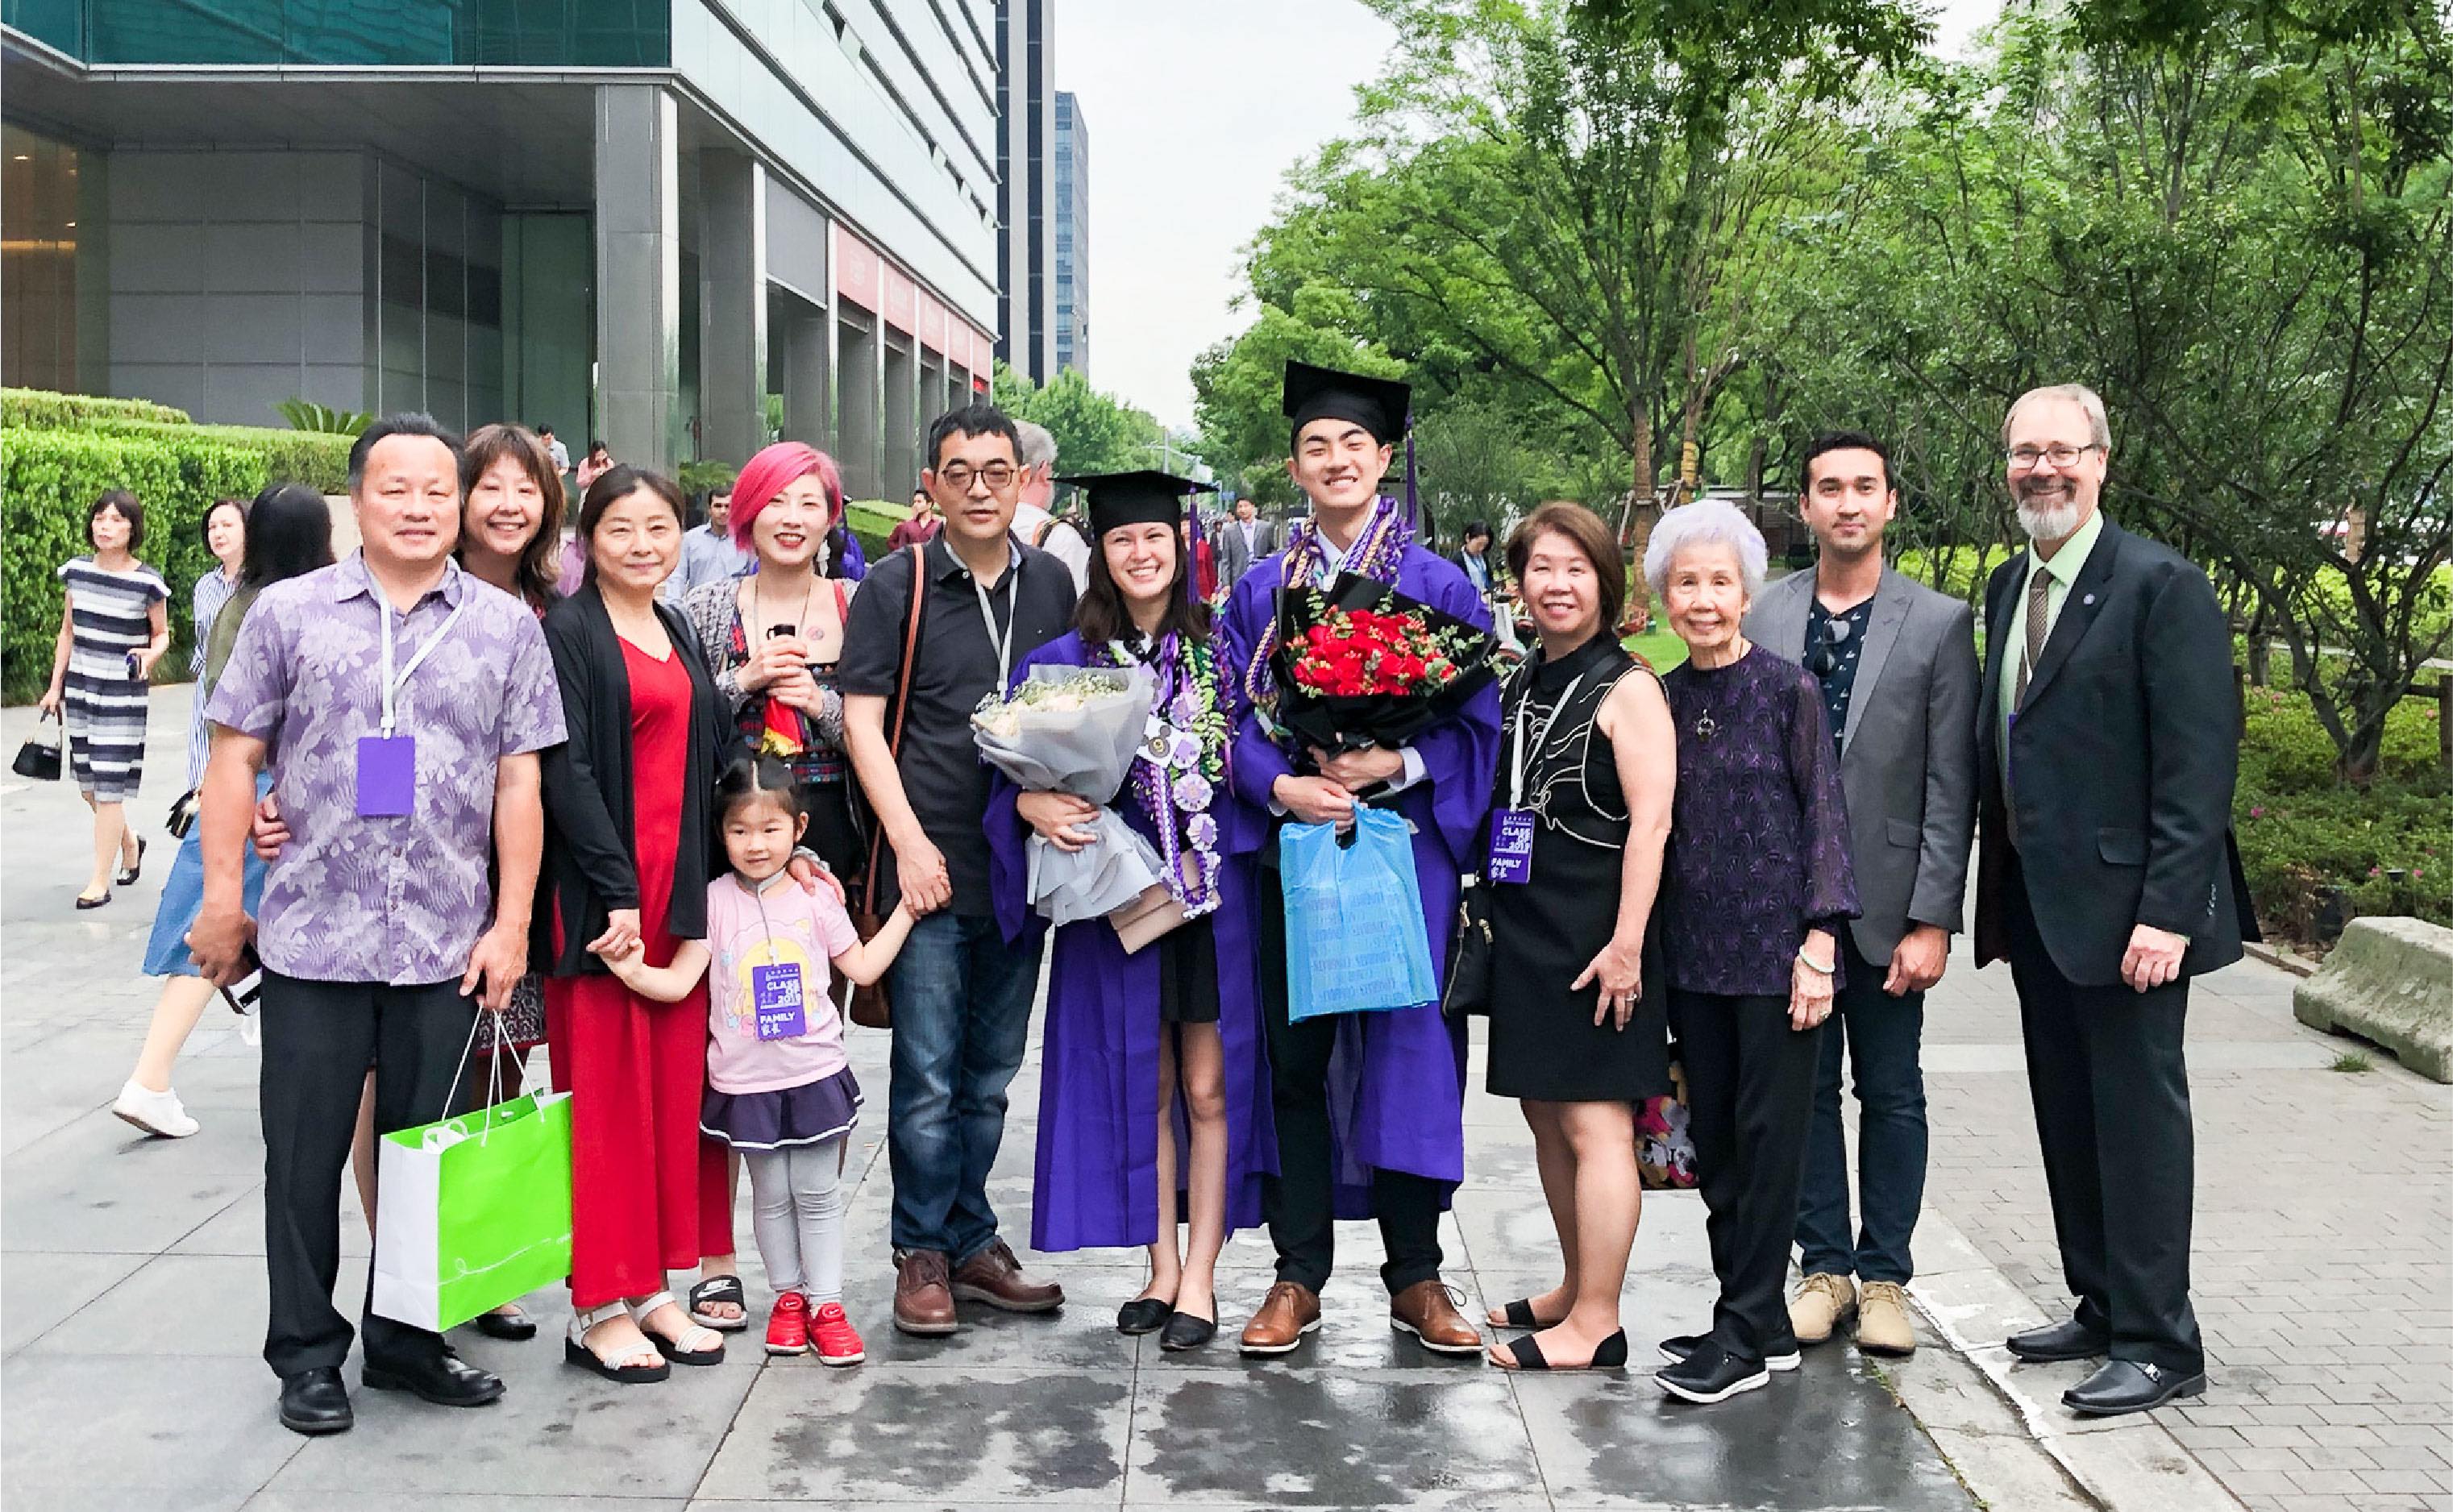 Sabrina and ZJ's families meeting during their graduation ceremony